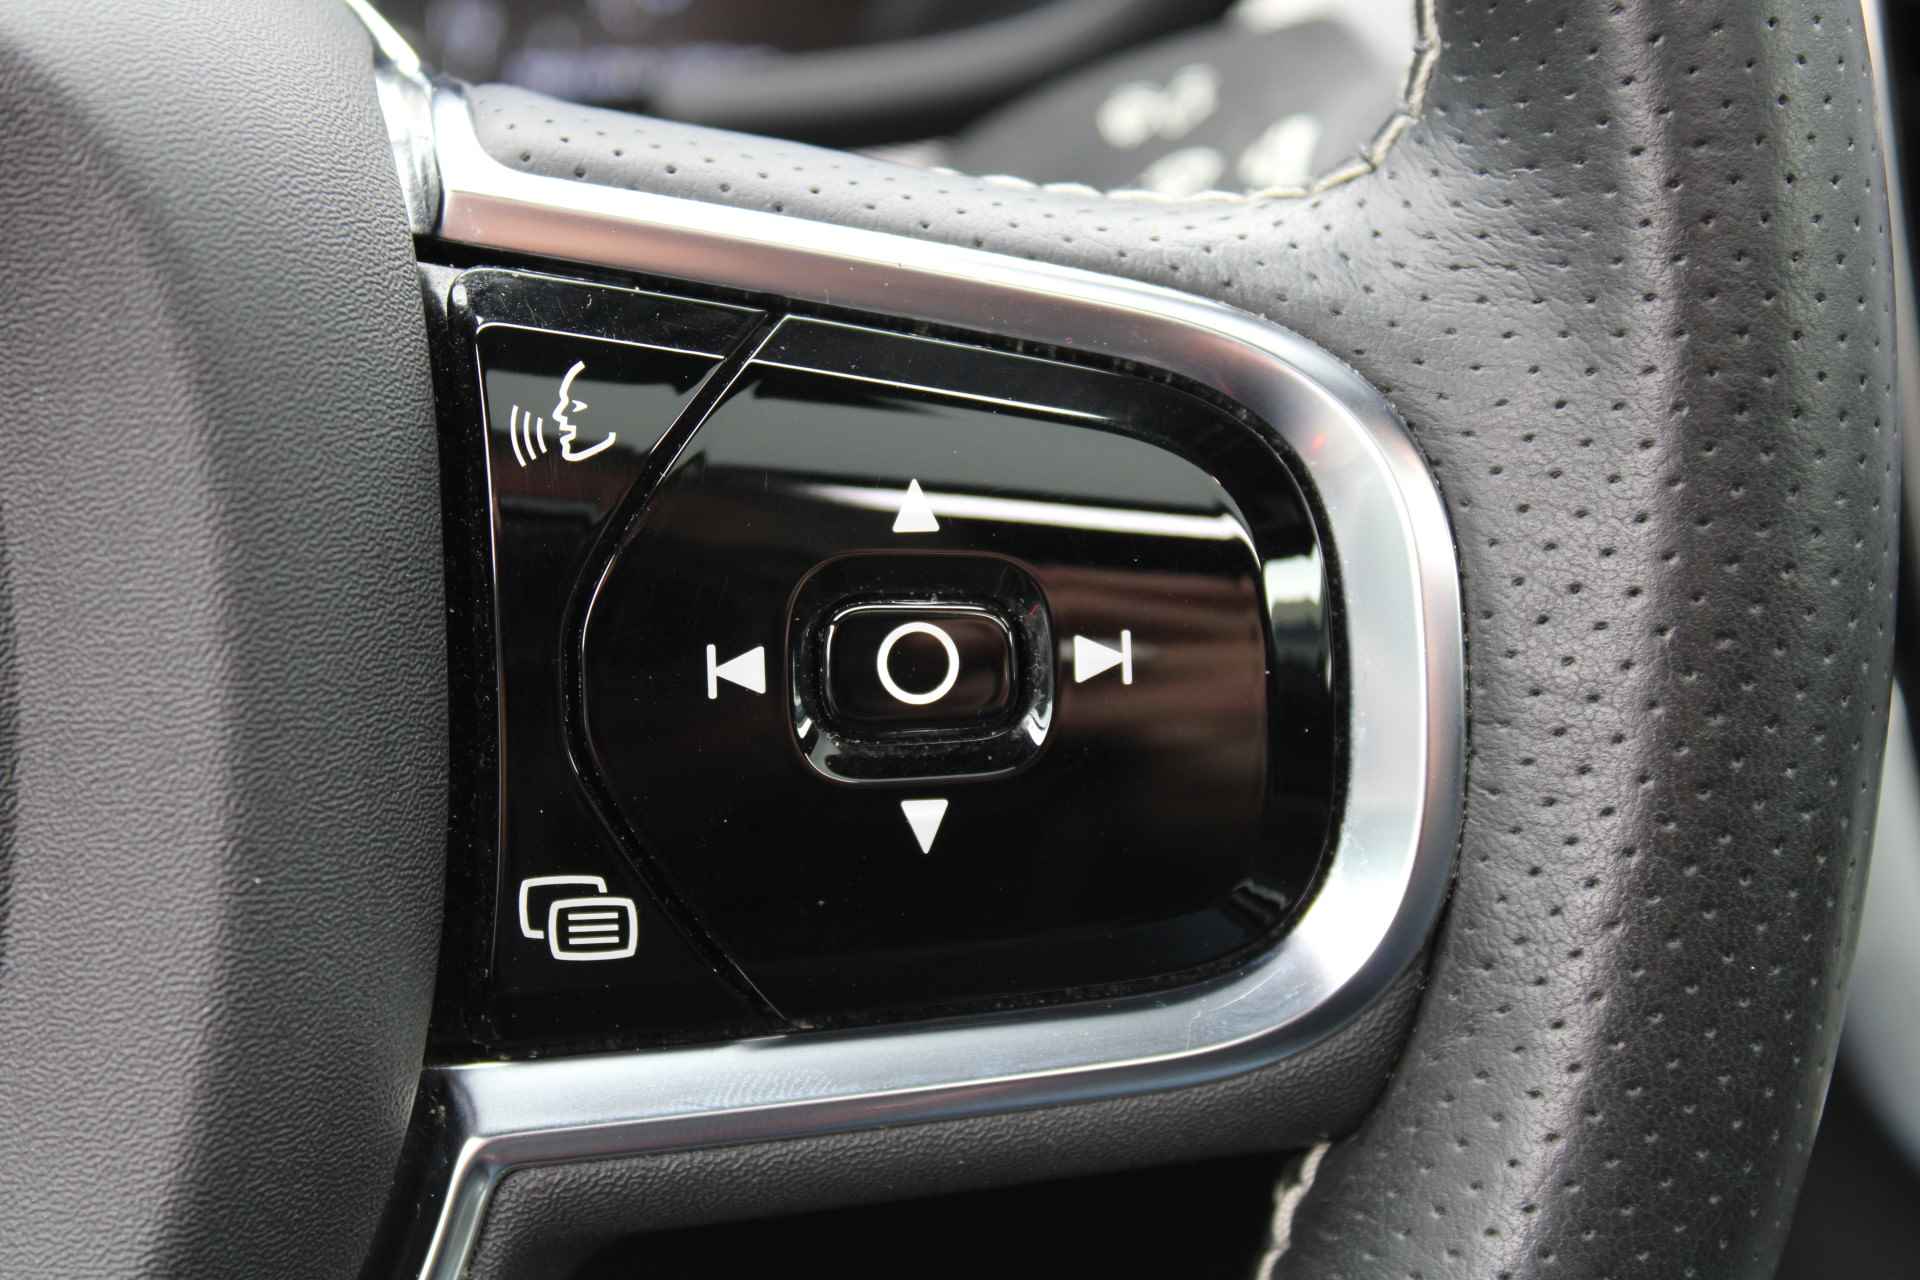 Volvo S90 2.0 T8 AWD R-DESIGN GEARTRONIC SCHUIFDAK 360 CAMERA- HEAD UP DISPLAY- BOWERS & WILKINS SOUND - 18/36